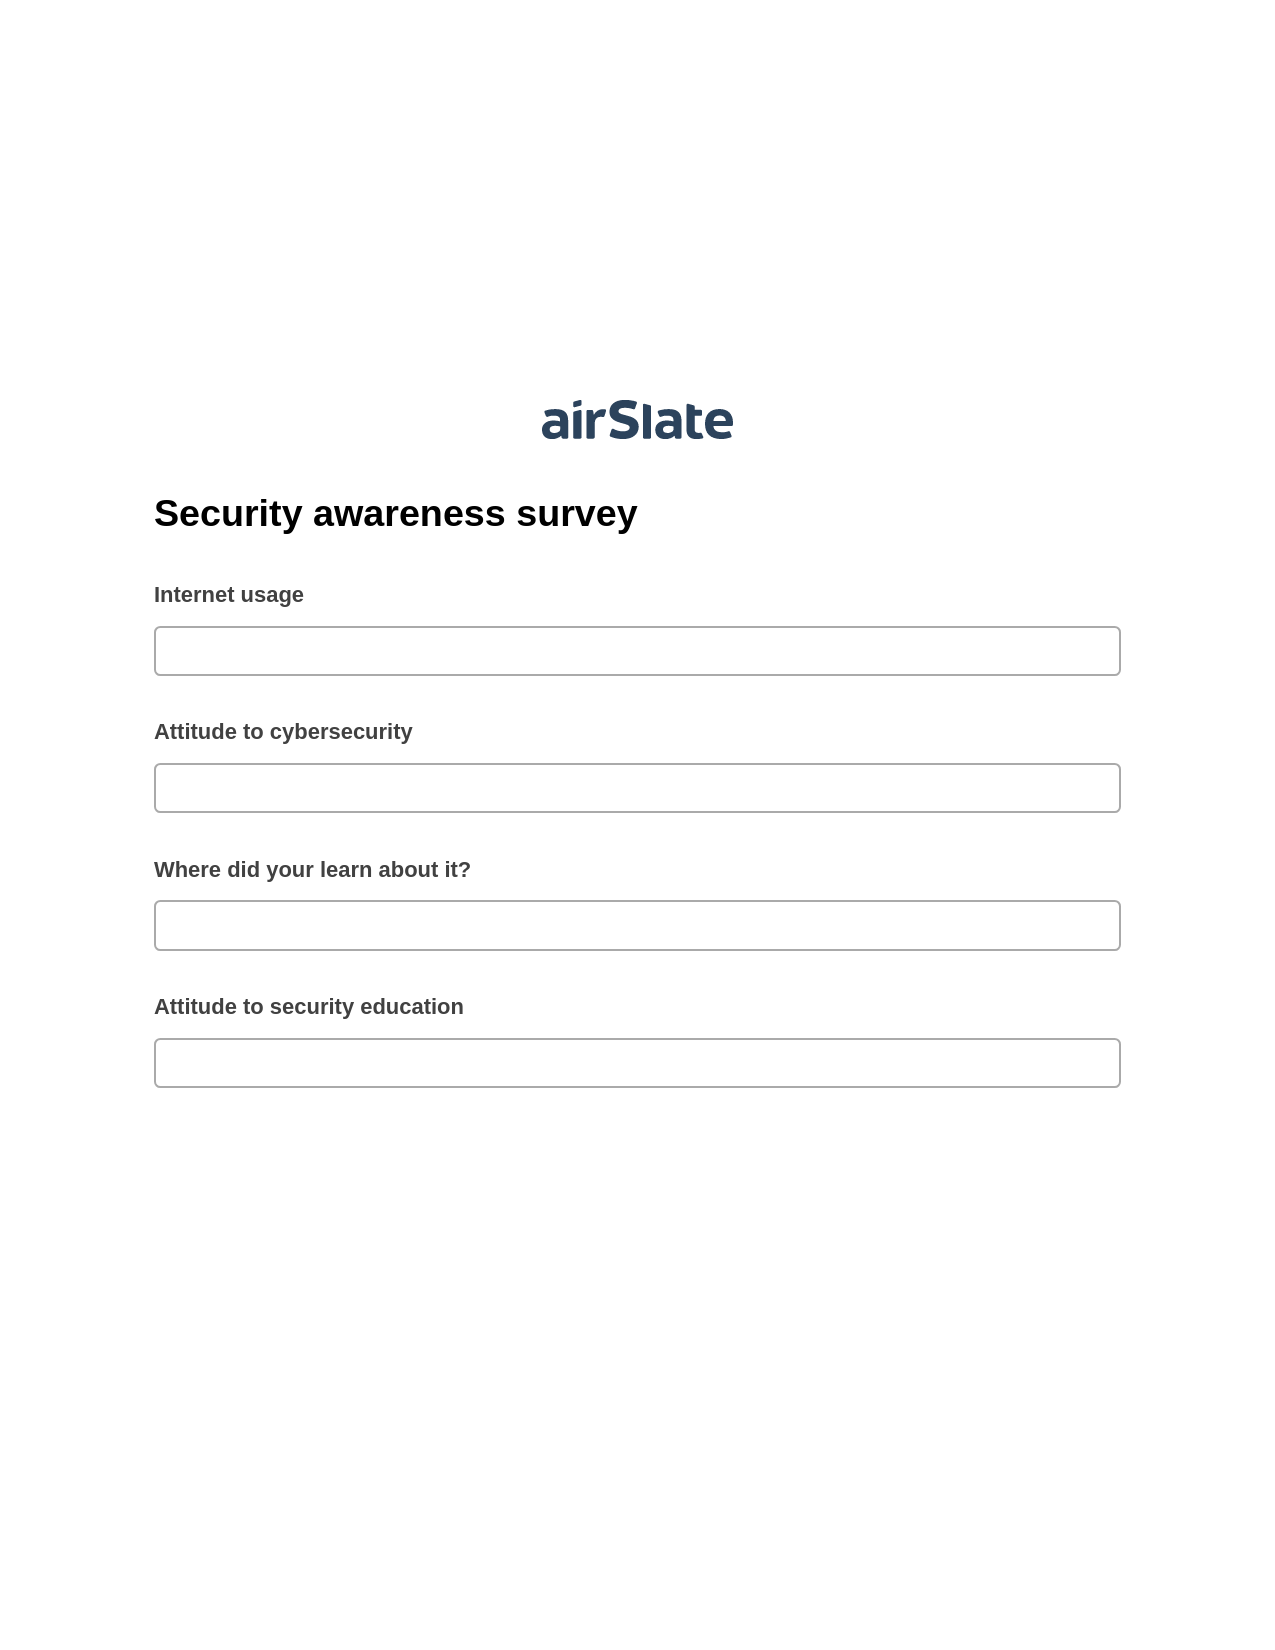 Security awareness survey Pre-fill from Google Sheet Dropdown Options Bot, In-person Signing Bot, Webhook Postfinish Bot